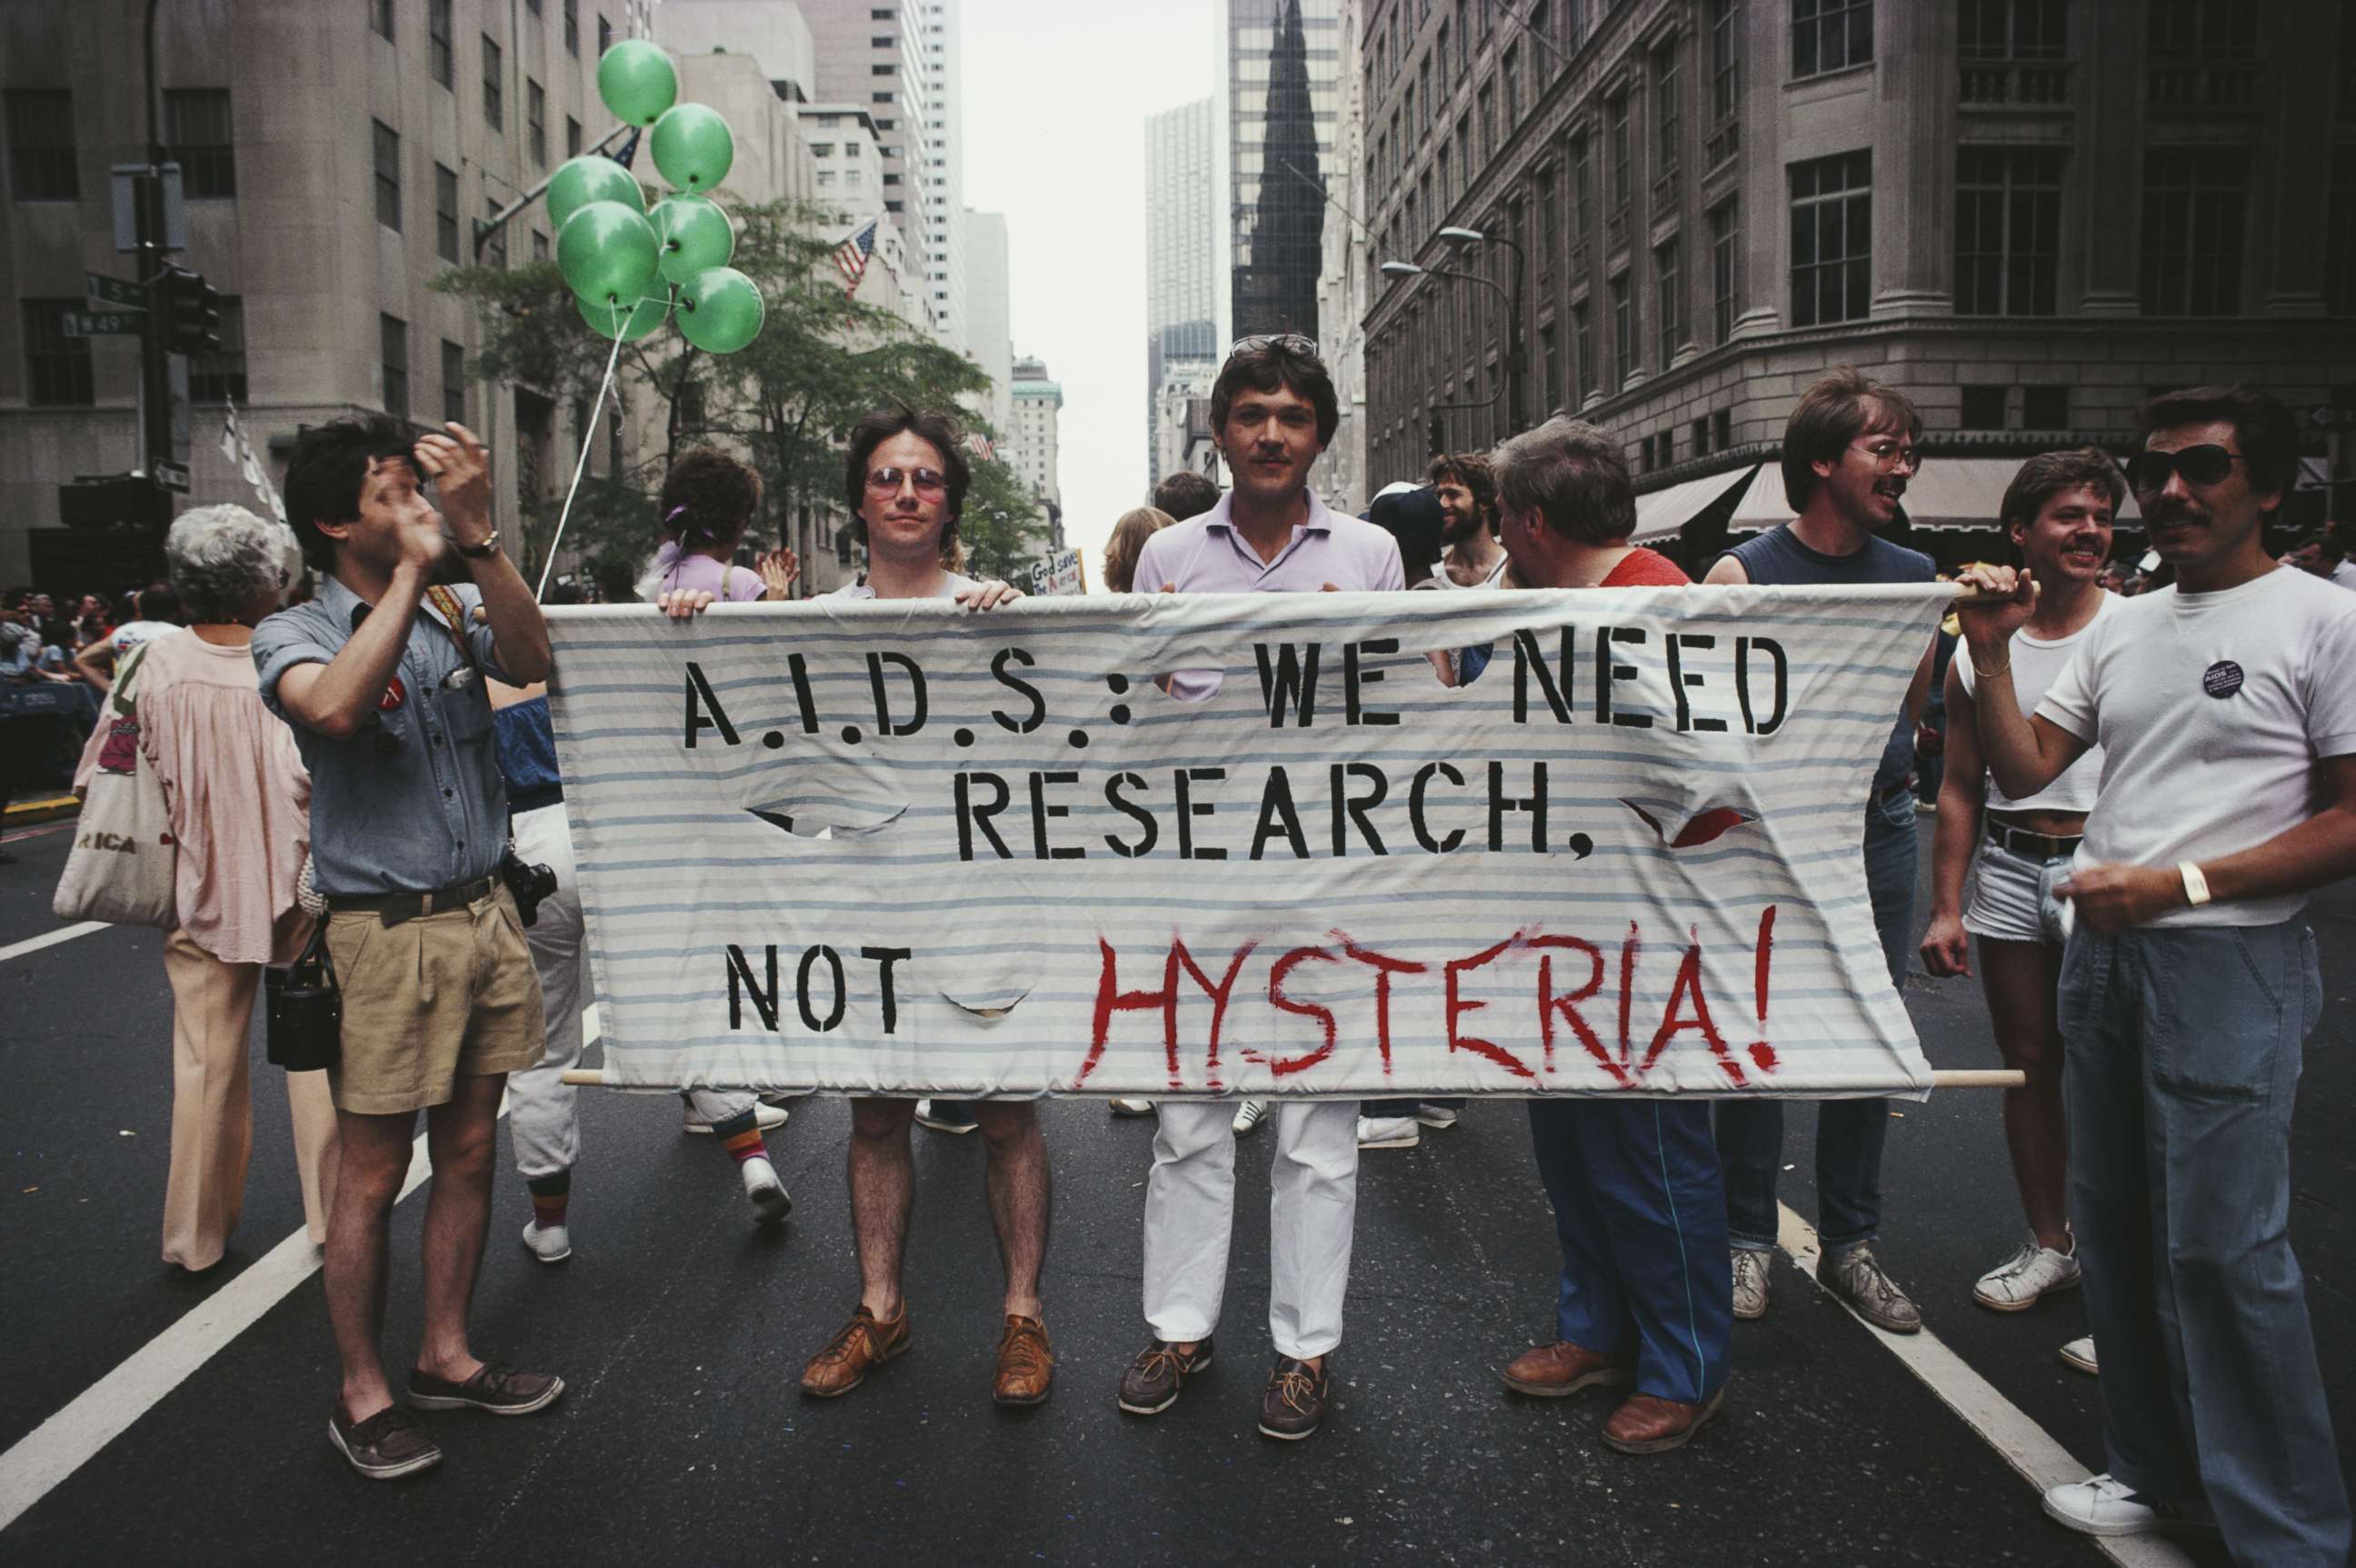 PHOTO: Marchers on a Gay Pride parade through Manhattan, New York City, carry a banner which reads 'A.I.D.S.: We need research, not hysteria!', June 1983.